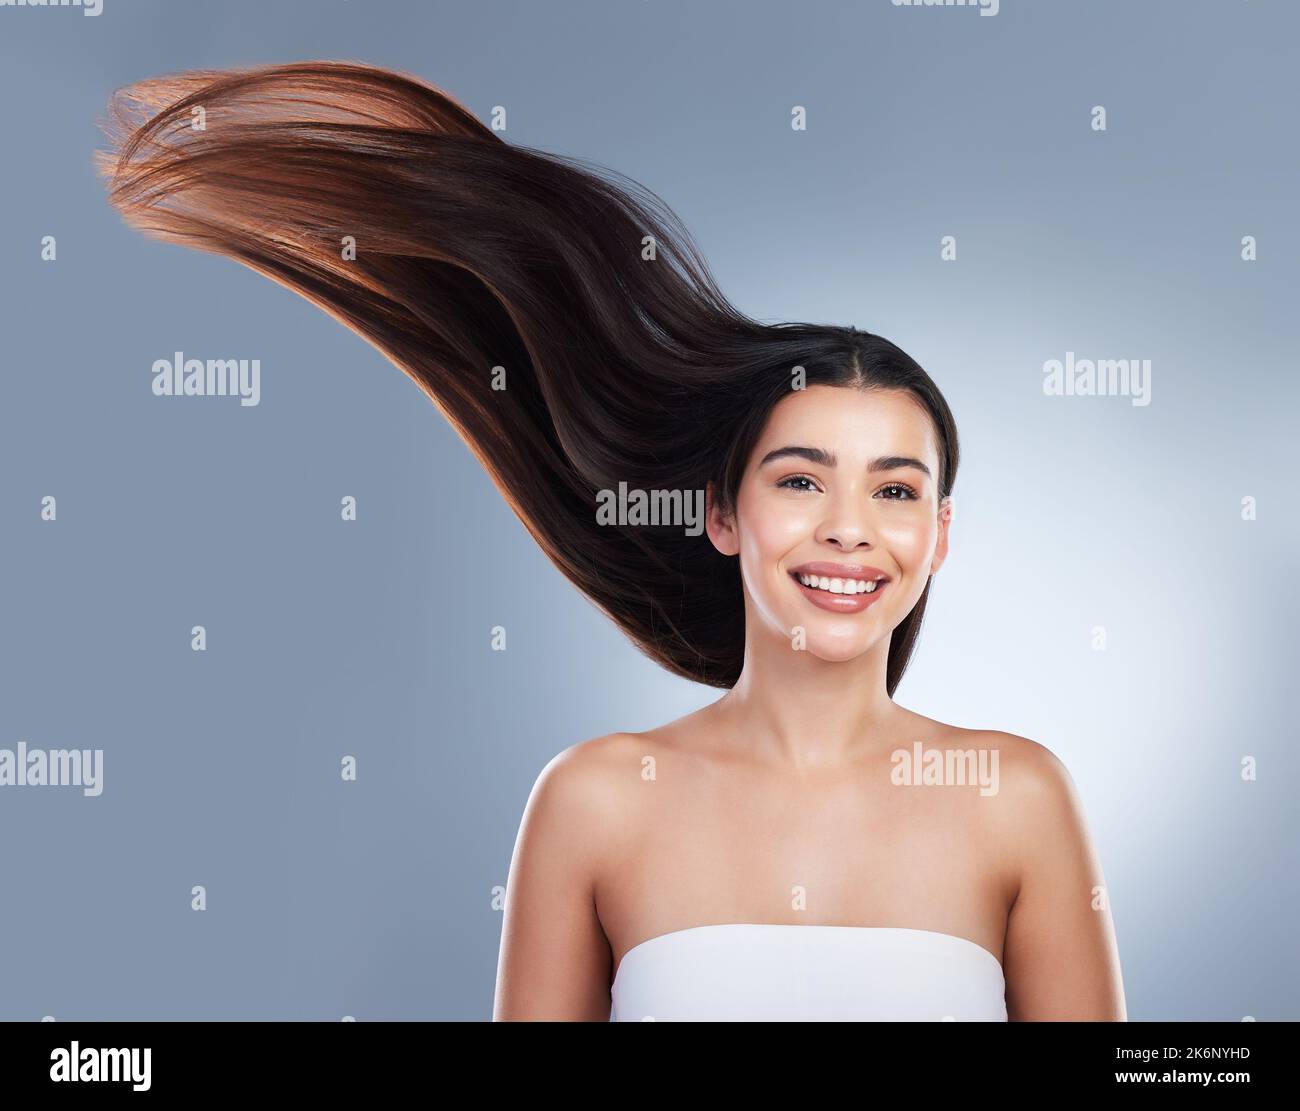 Portrait of woman with shiny smooth long hair. Young brunette woman with beautiful hair. Young girl with long brown hair flying in the wind against a Stock Photo